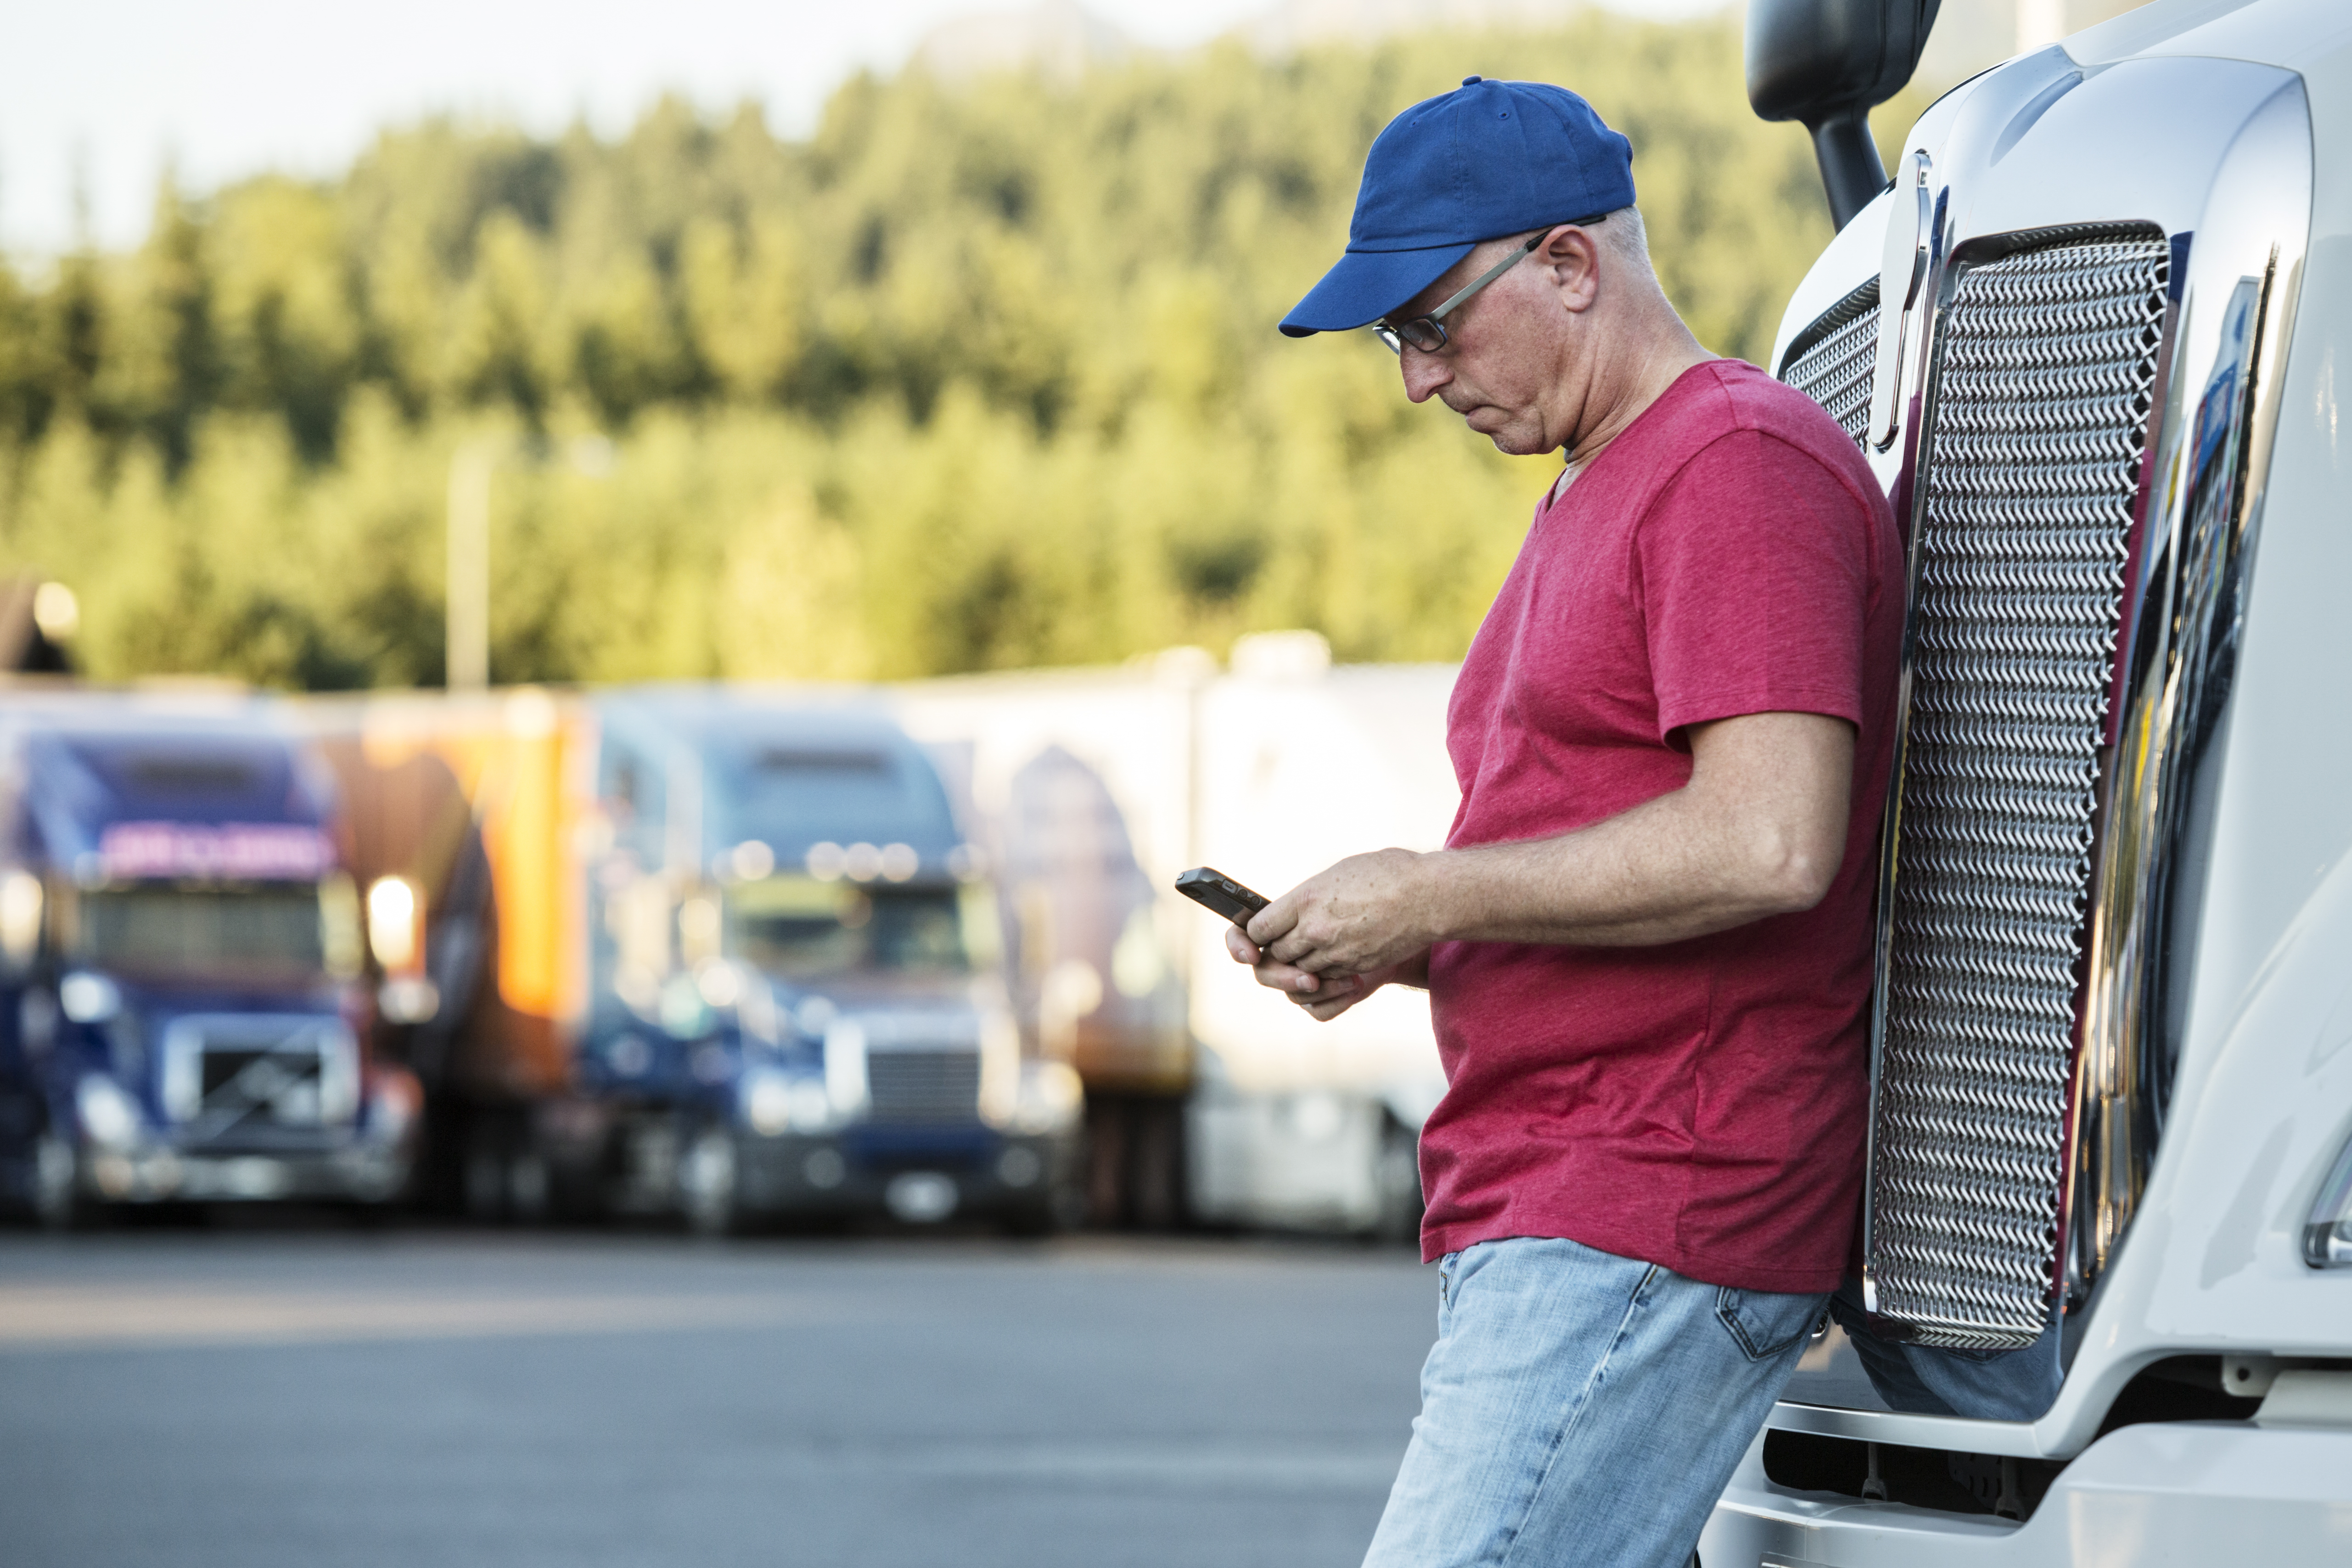 truck driver leaning up against semi truck looking down at phone in hand